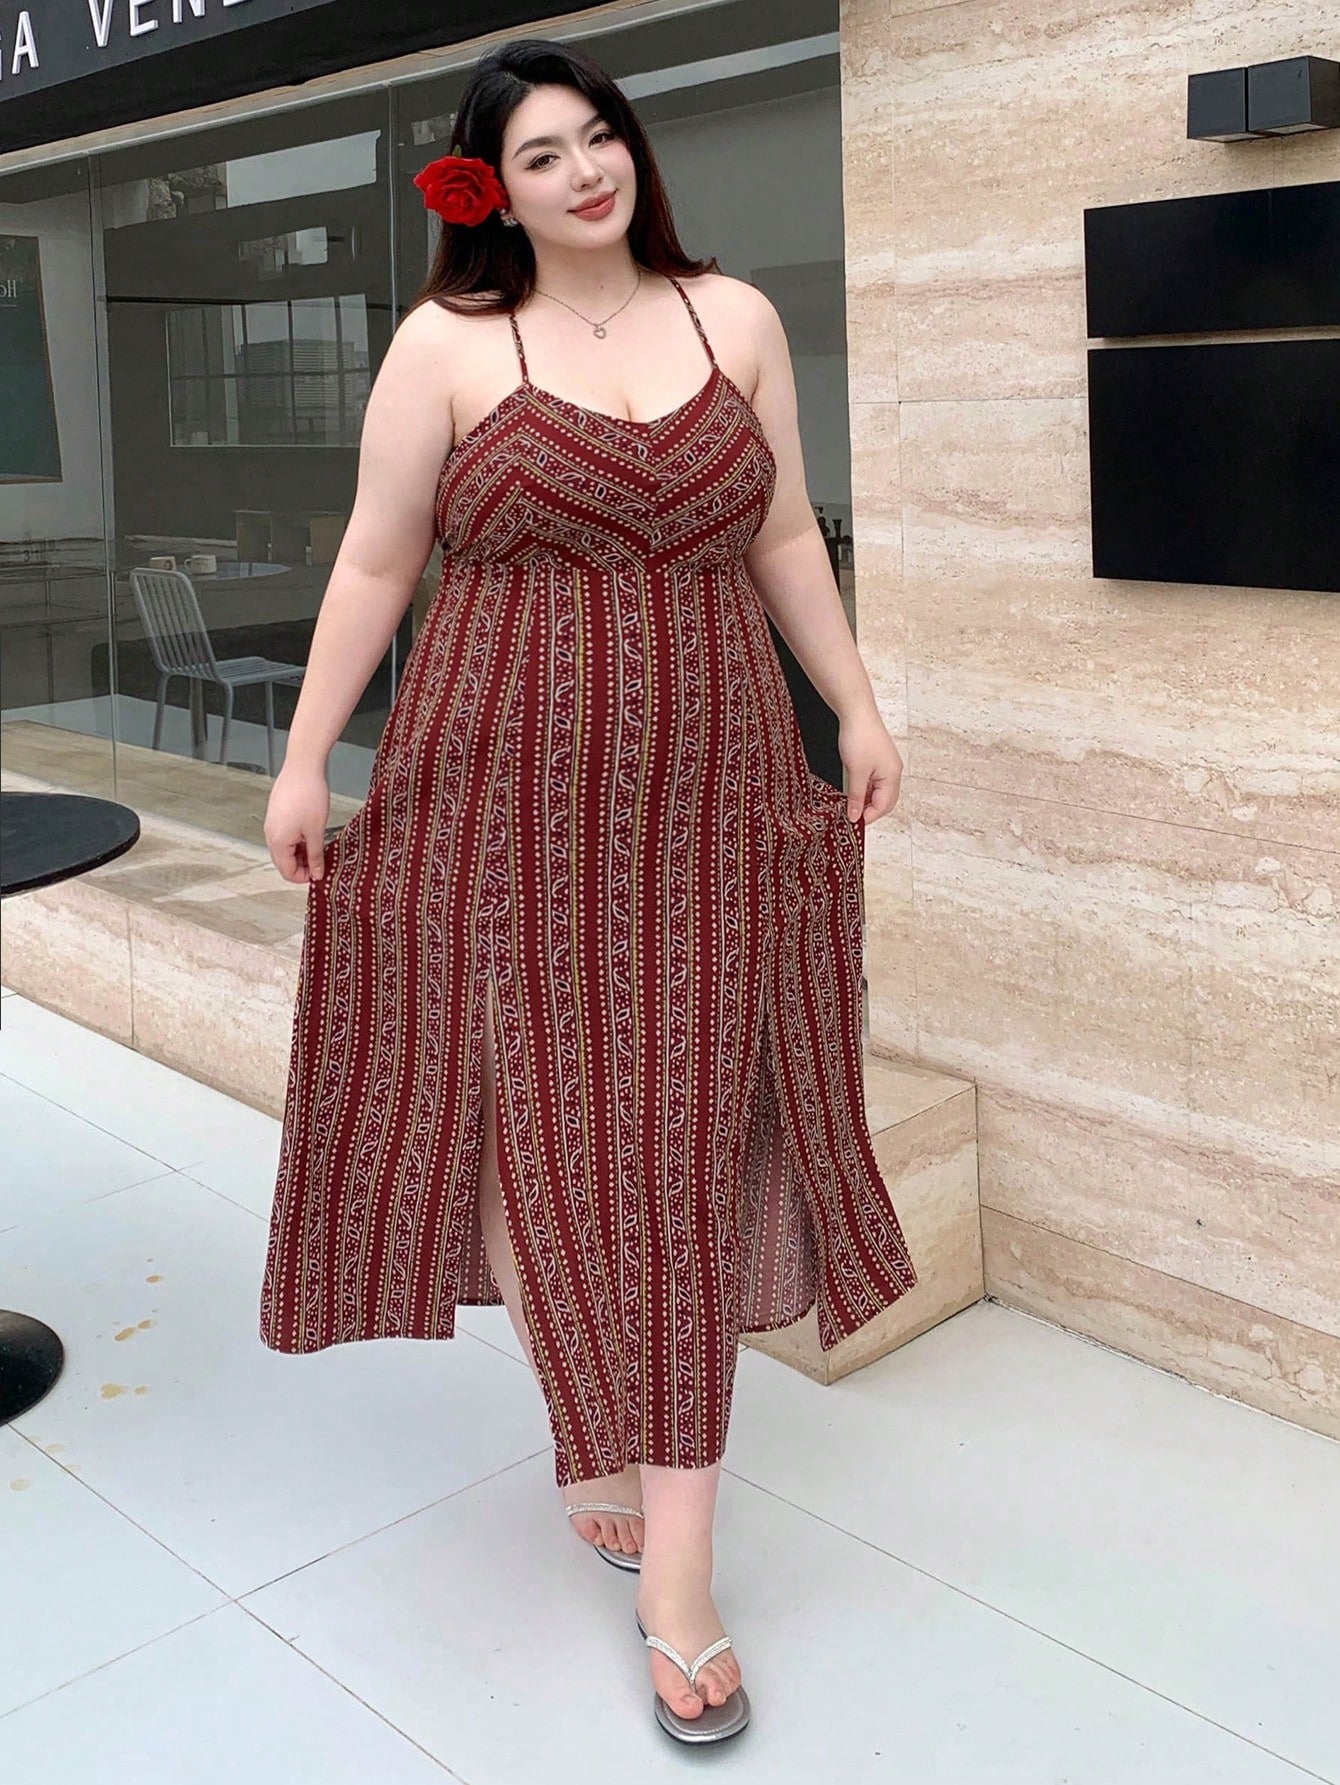 Plus Size Women's Summer Plant Printed Vacation-Style Sleeveless Backless Sexy Maxi Dress